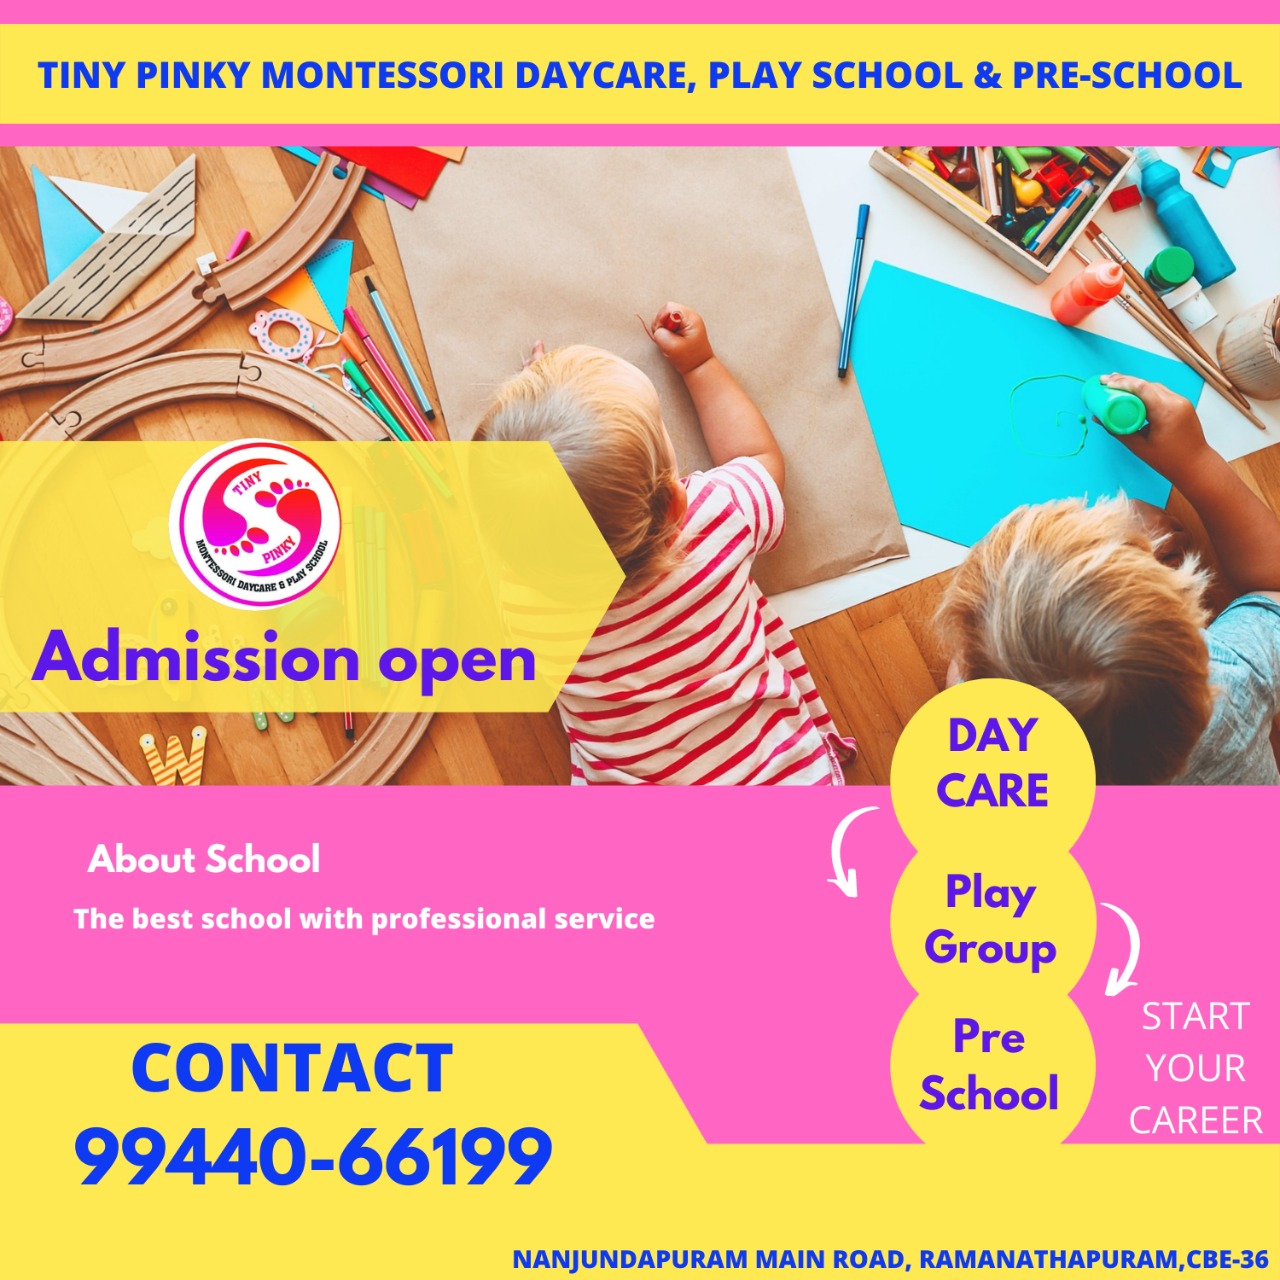 Admission open for playschool - Tinypinky Montessori Daycare & Pre-School